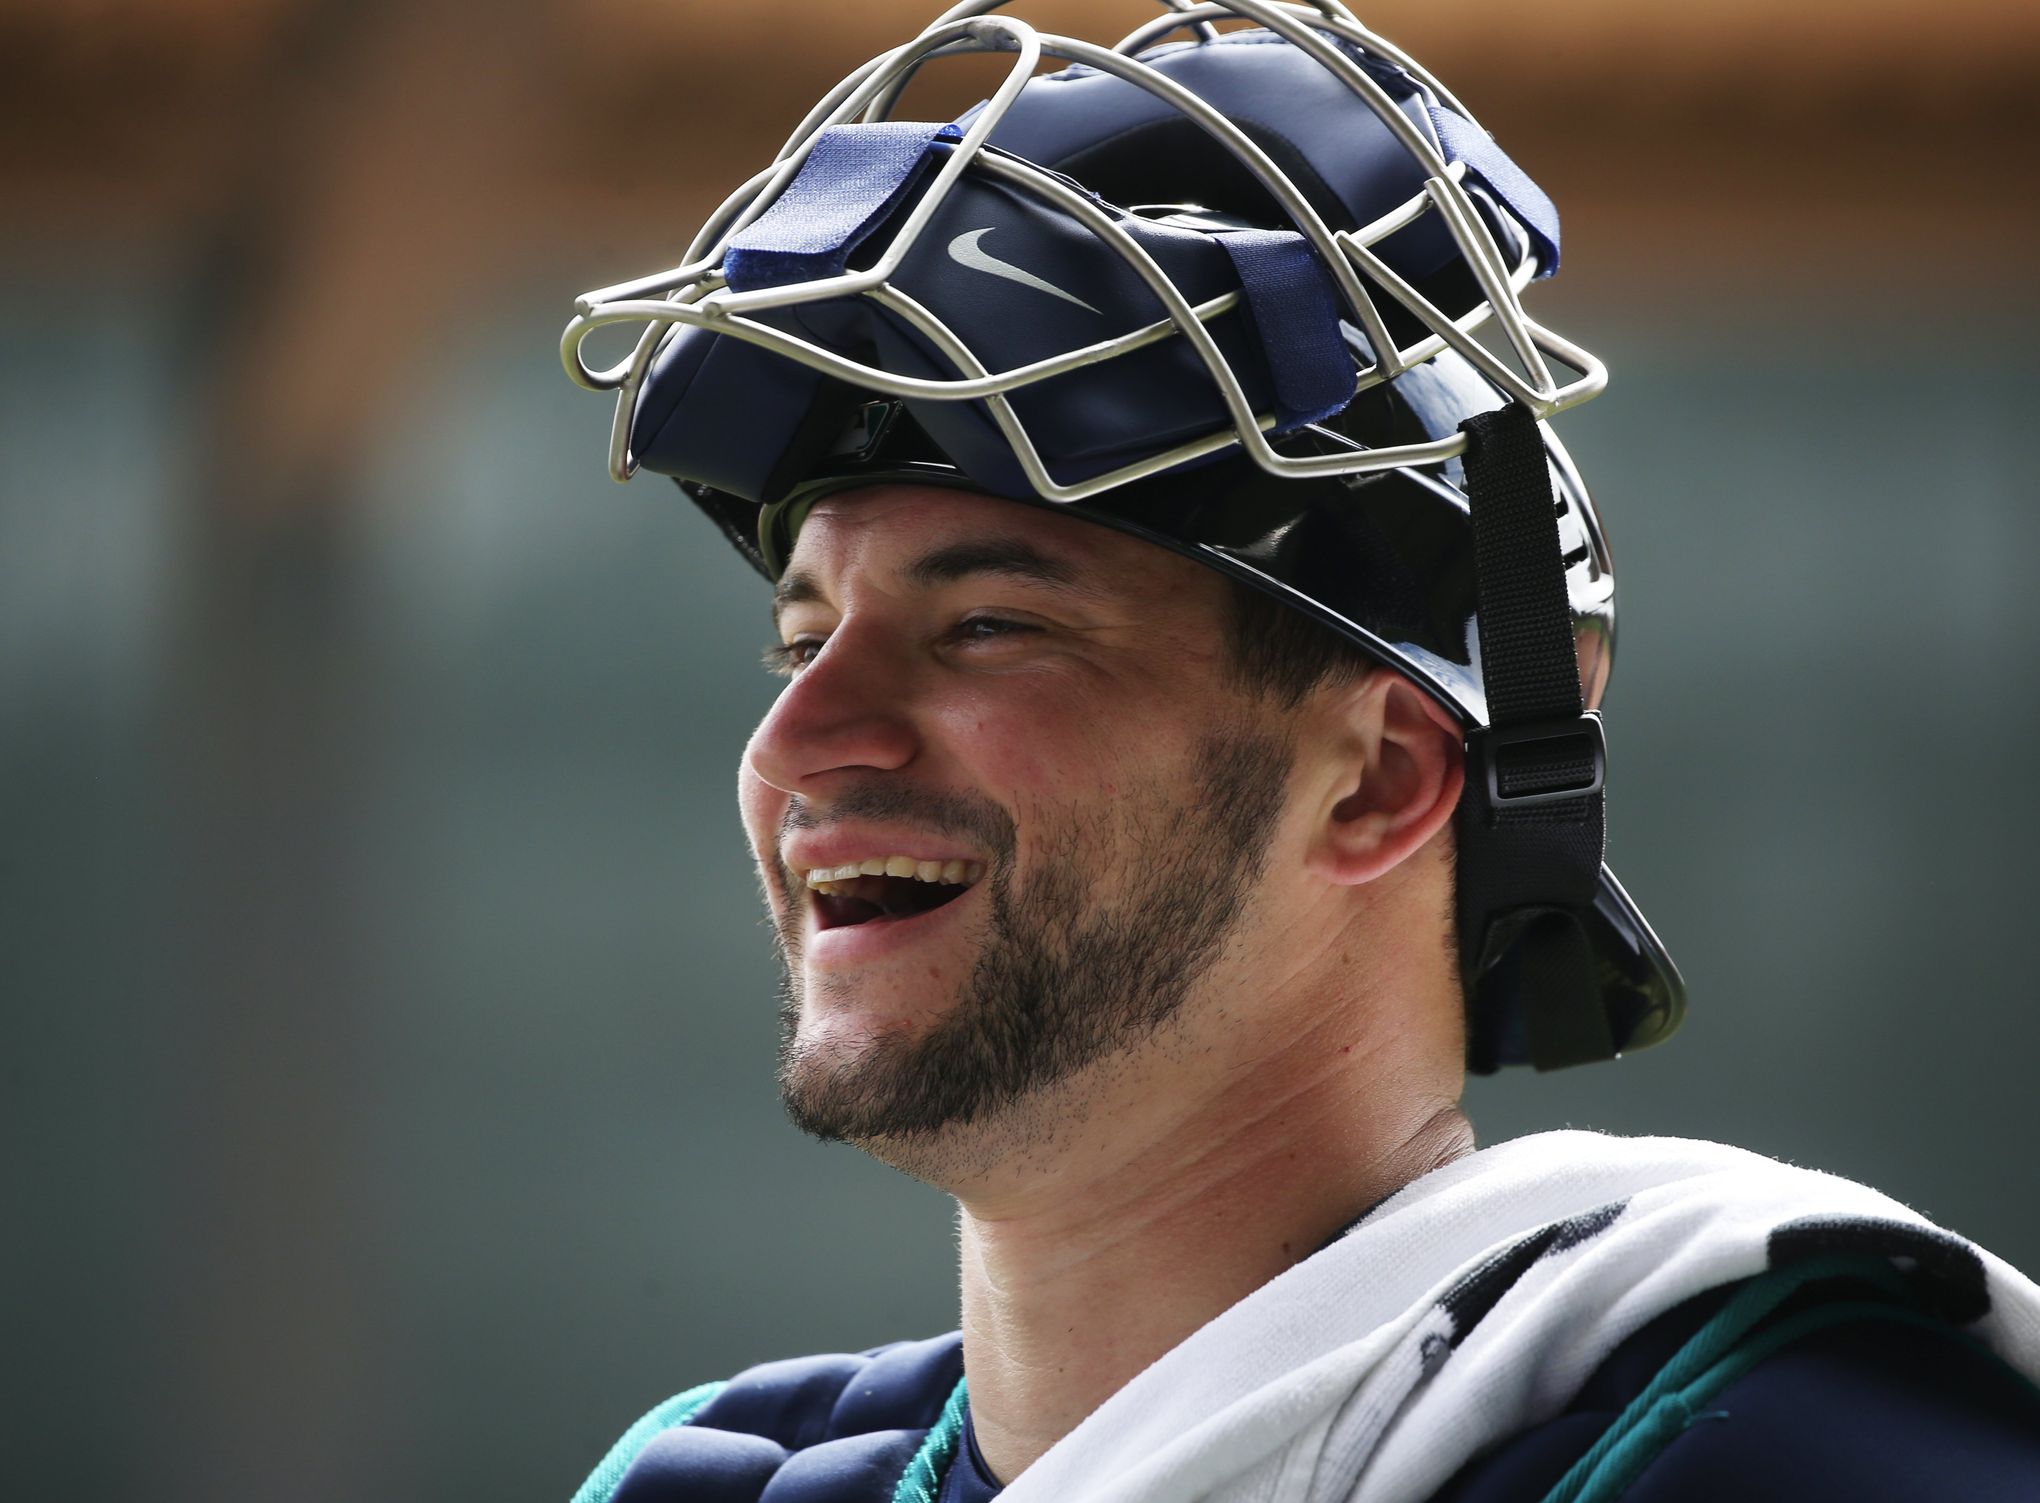 Mike Zunino - MLB Catcher - News, Stats, Bio and more - The Athletic